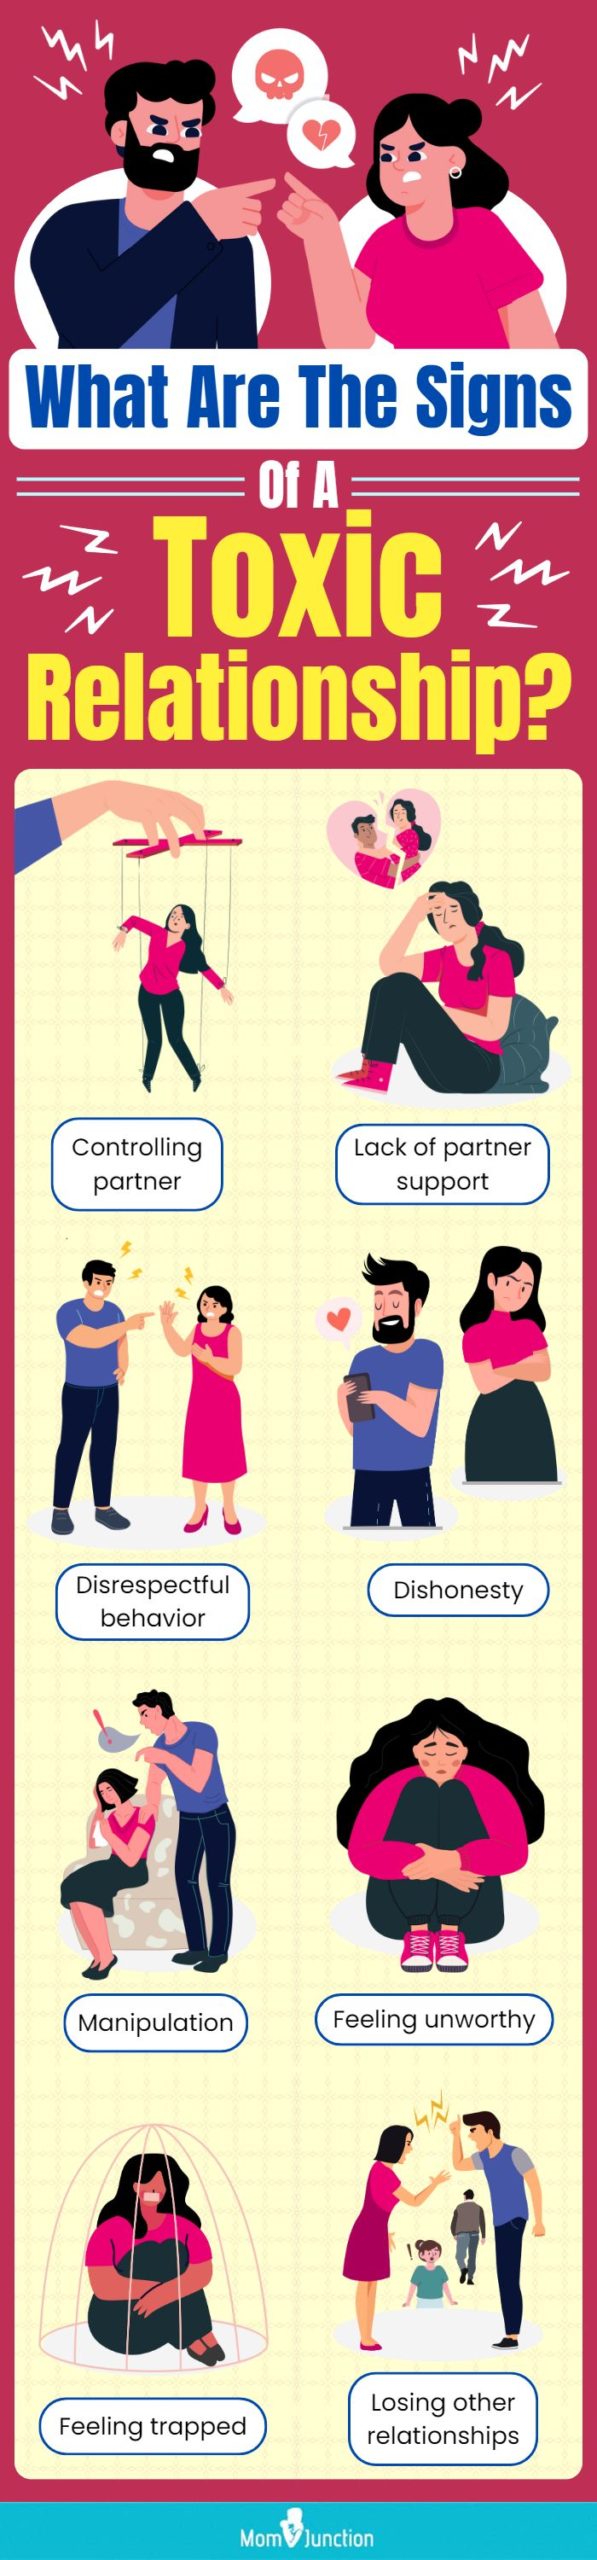 what are the signs of a toxic relationship(infographic)